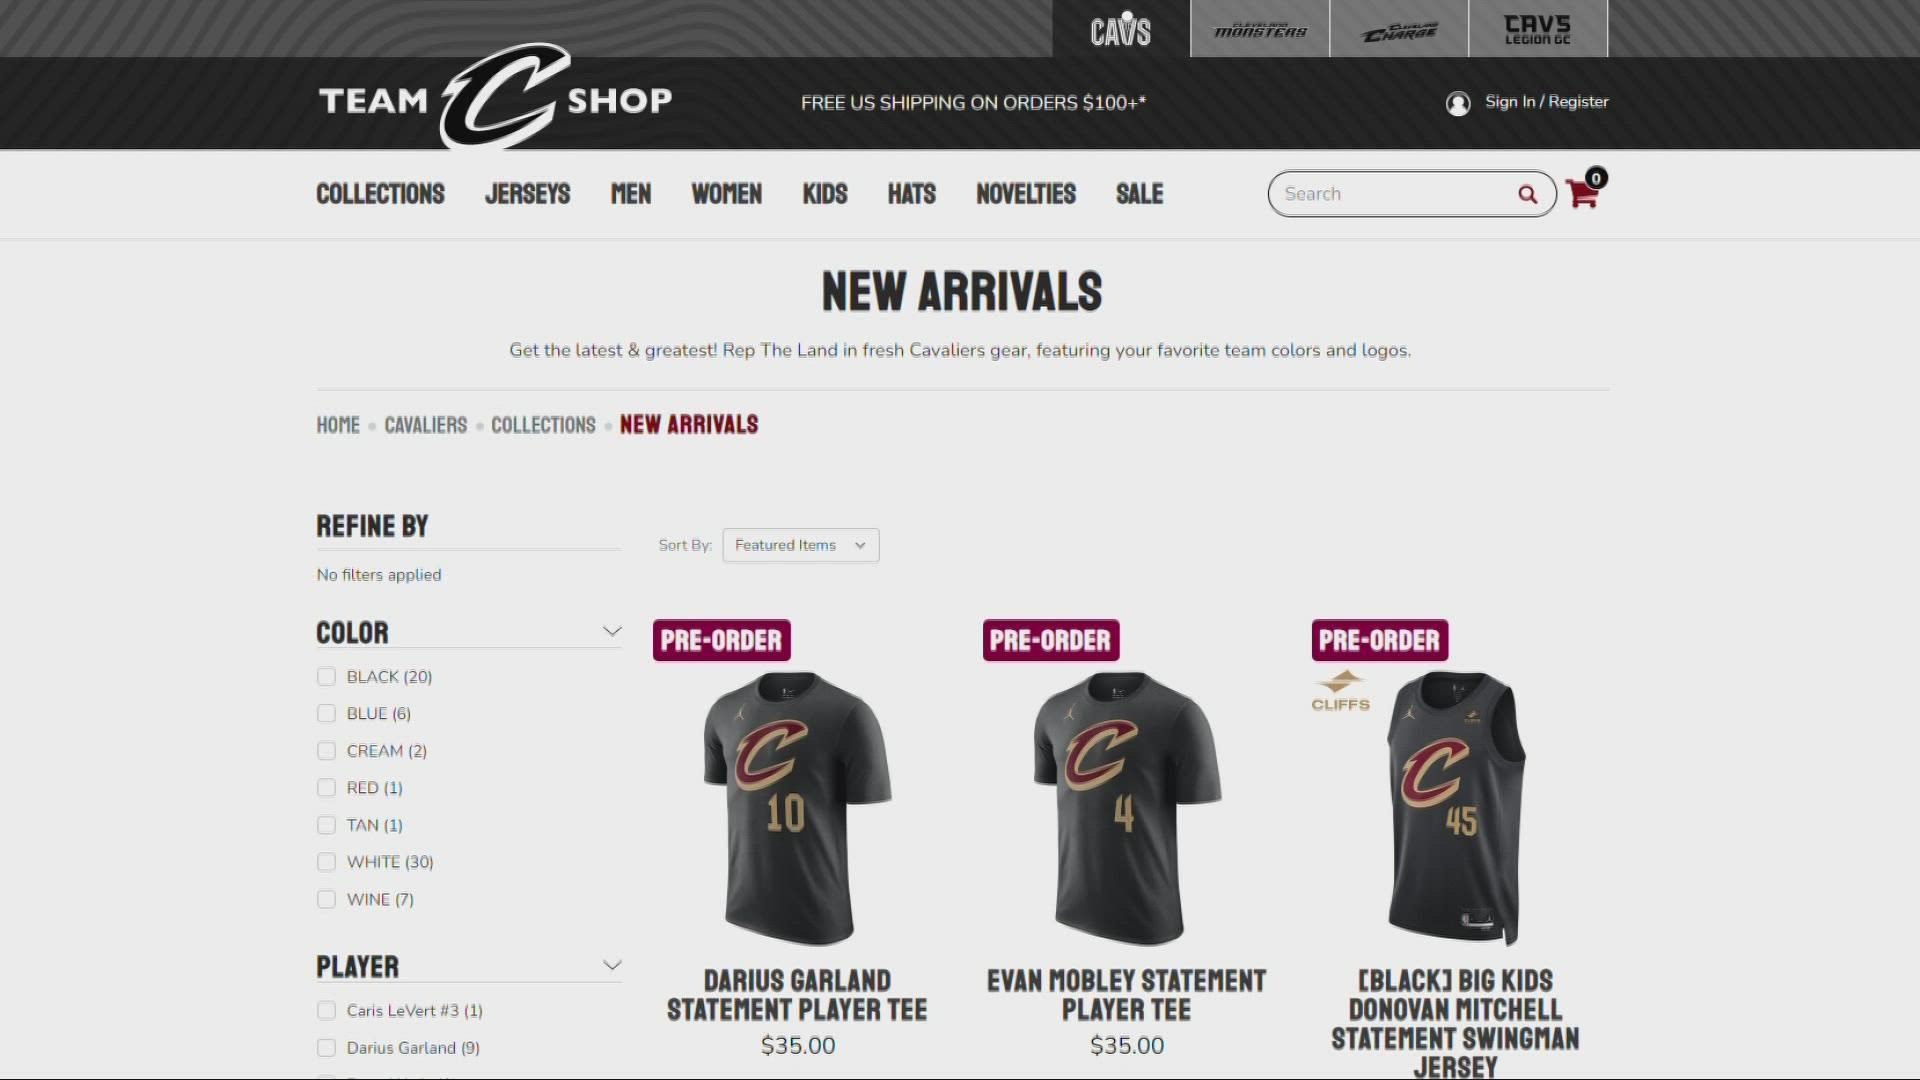 The changes include a Cleveland Cavaliers team shop.